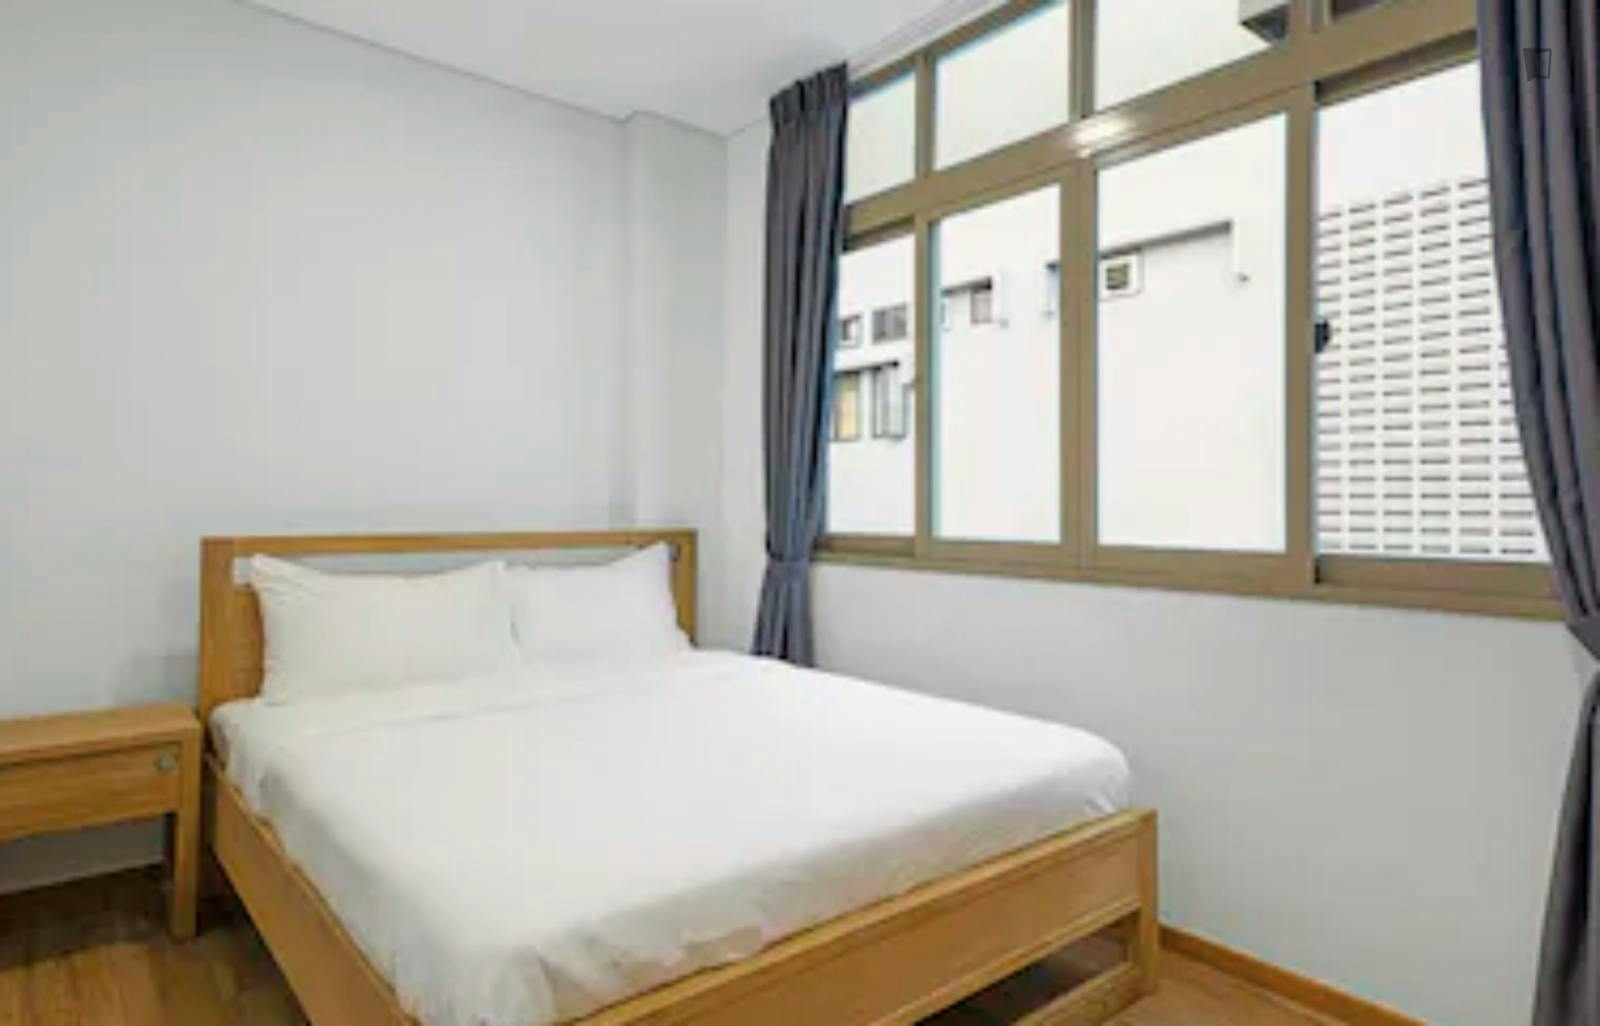 Cosy double bedroom a few minutes walking away from Bendemeer metro station